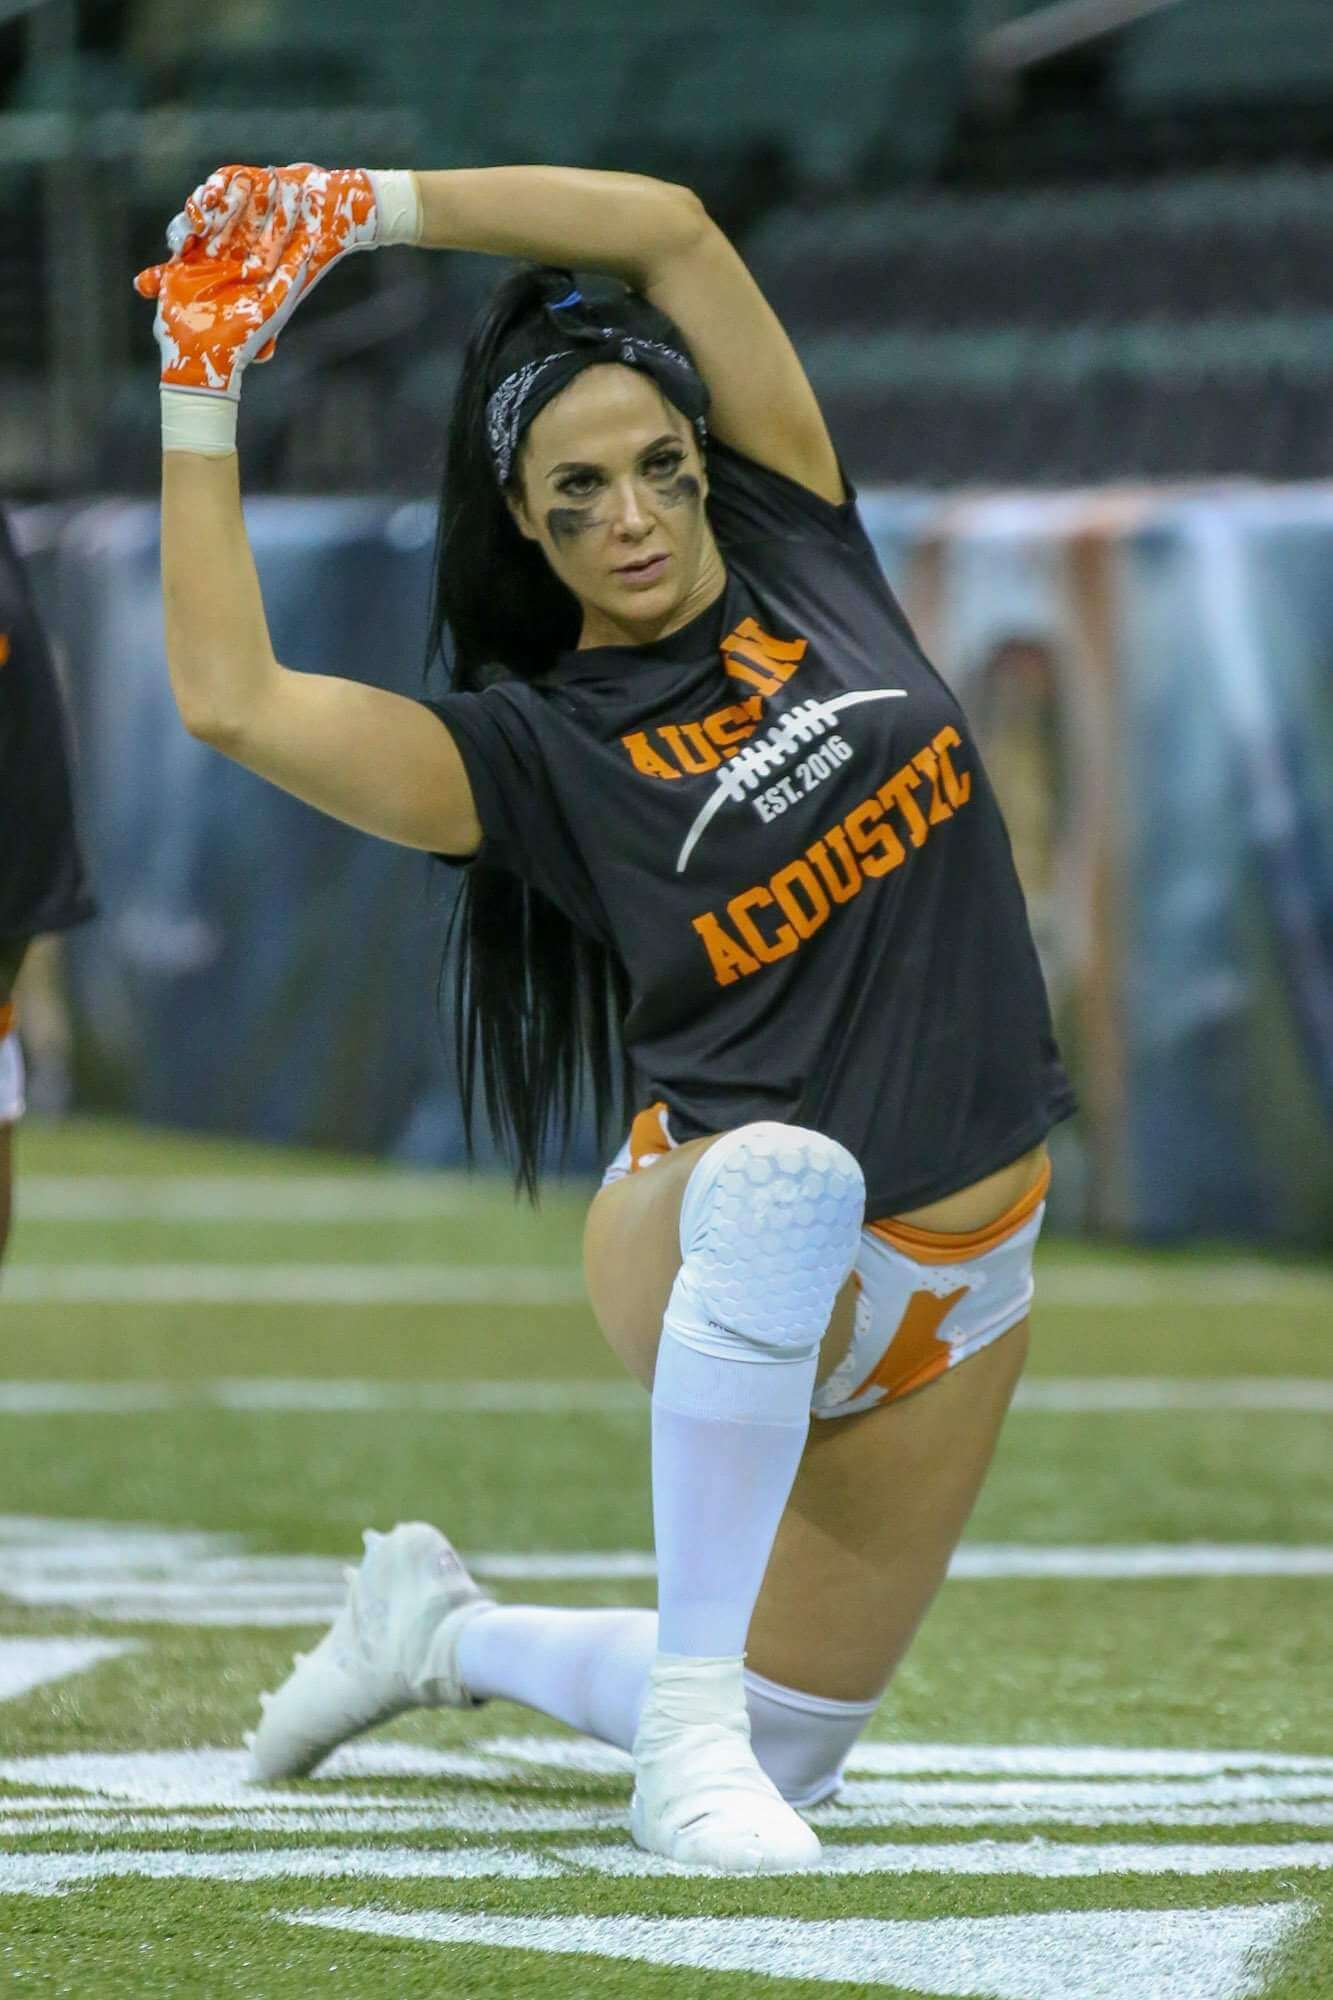 The Legends Football League Beautiful Women And Football, Need We Say Anymore! 147